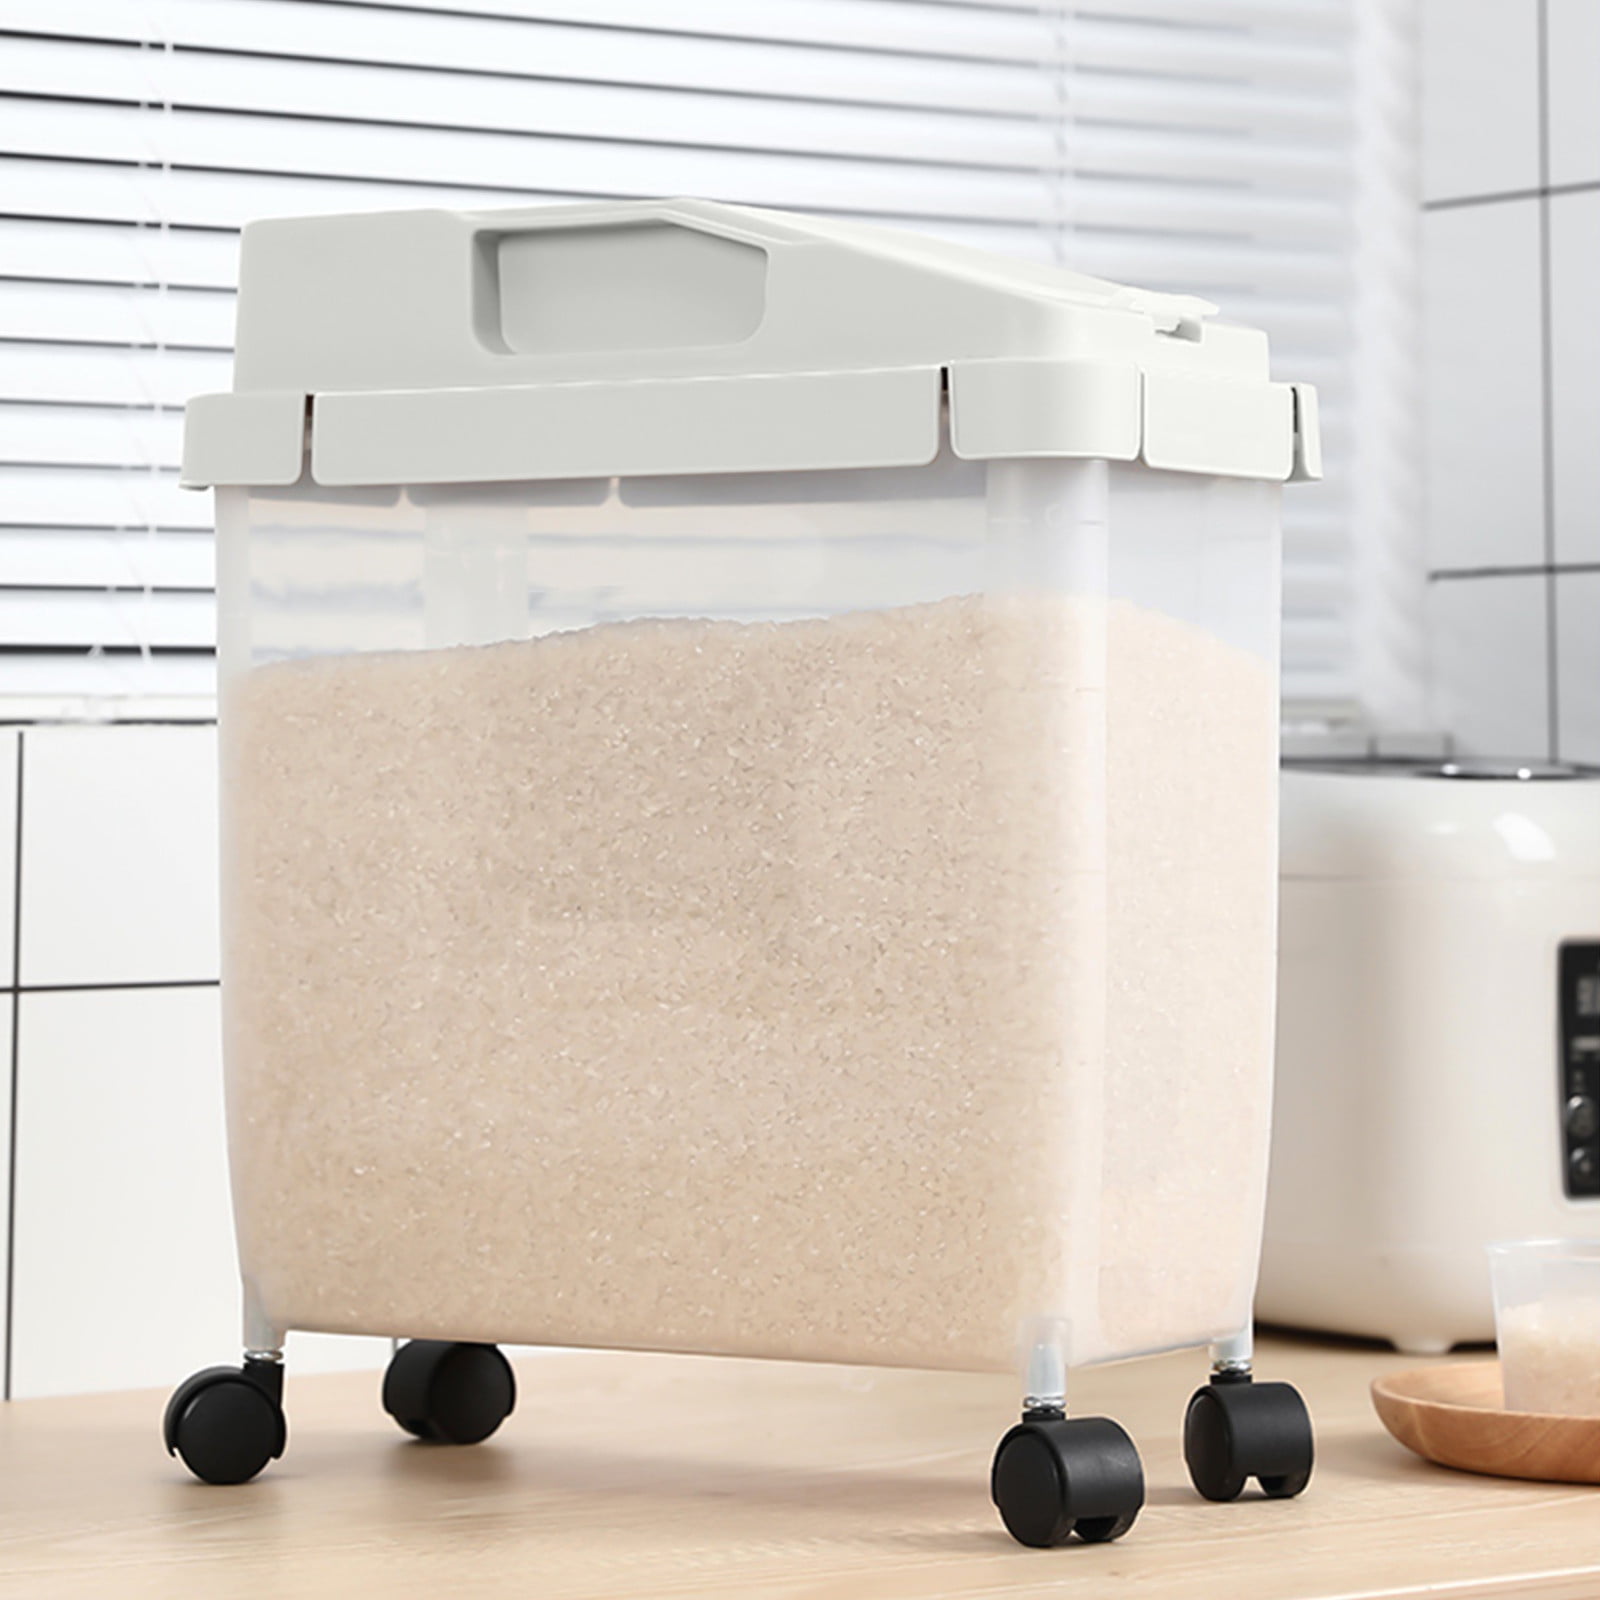 White Large Food Storage Container 20 Lb(11 L) Extra Large Airtight Plastic  Storage Container Flour Food Containers with Measuring Cup Lid Suits for